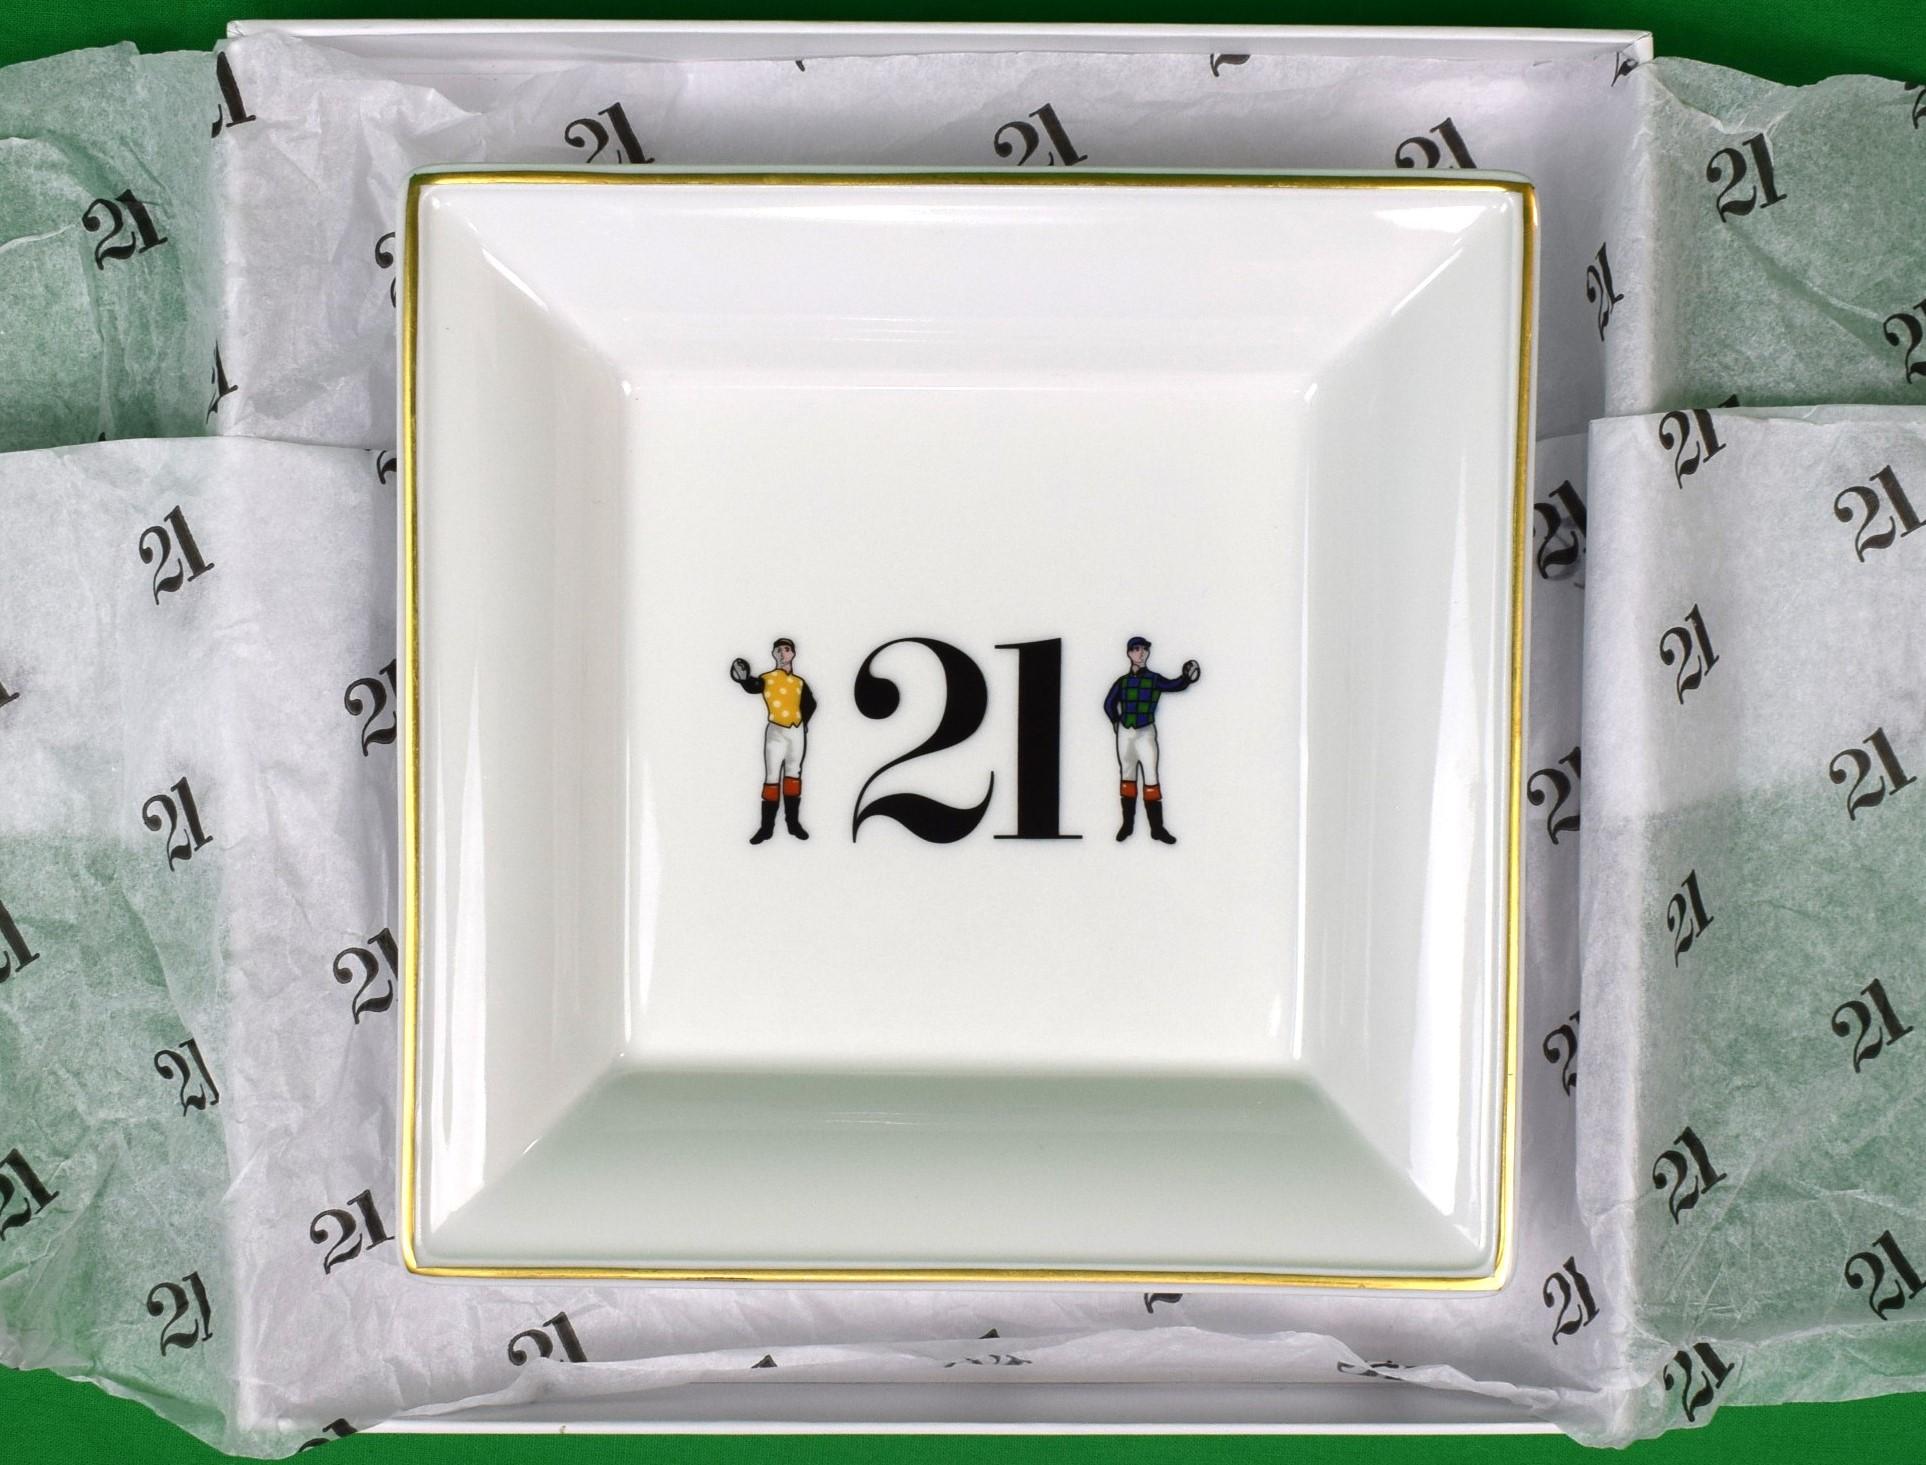 The "21" Club French Porcelain Limoges Jockey Ashtray (New w/ Box) - Art by Unknown